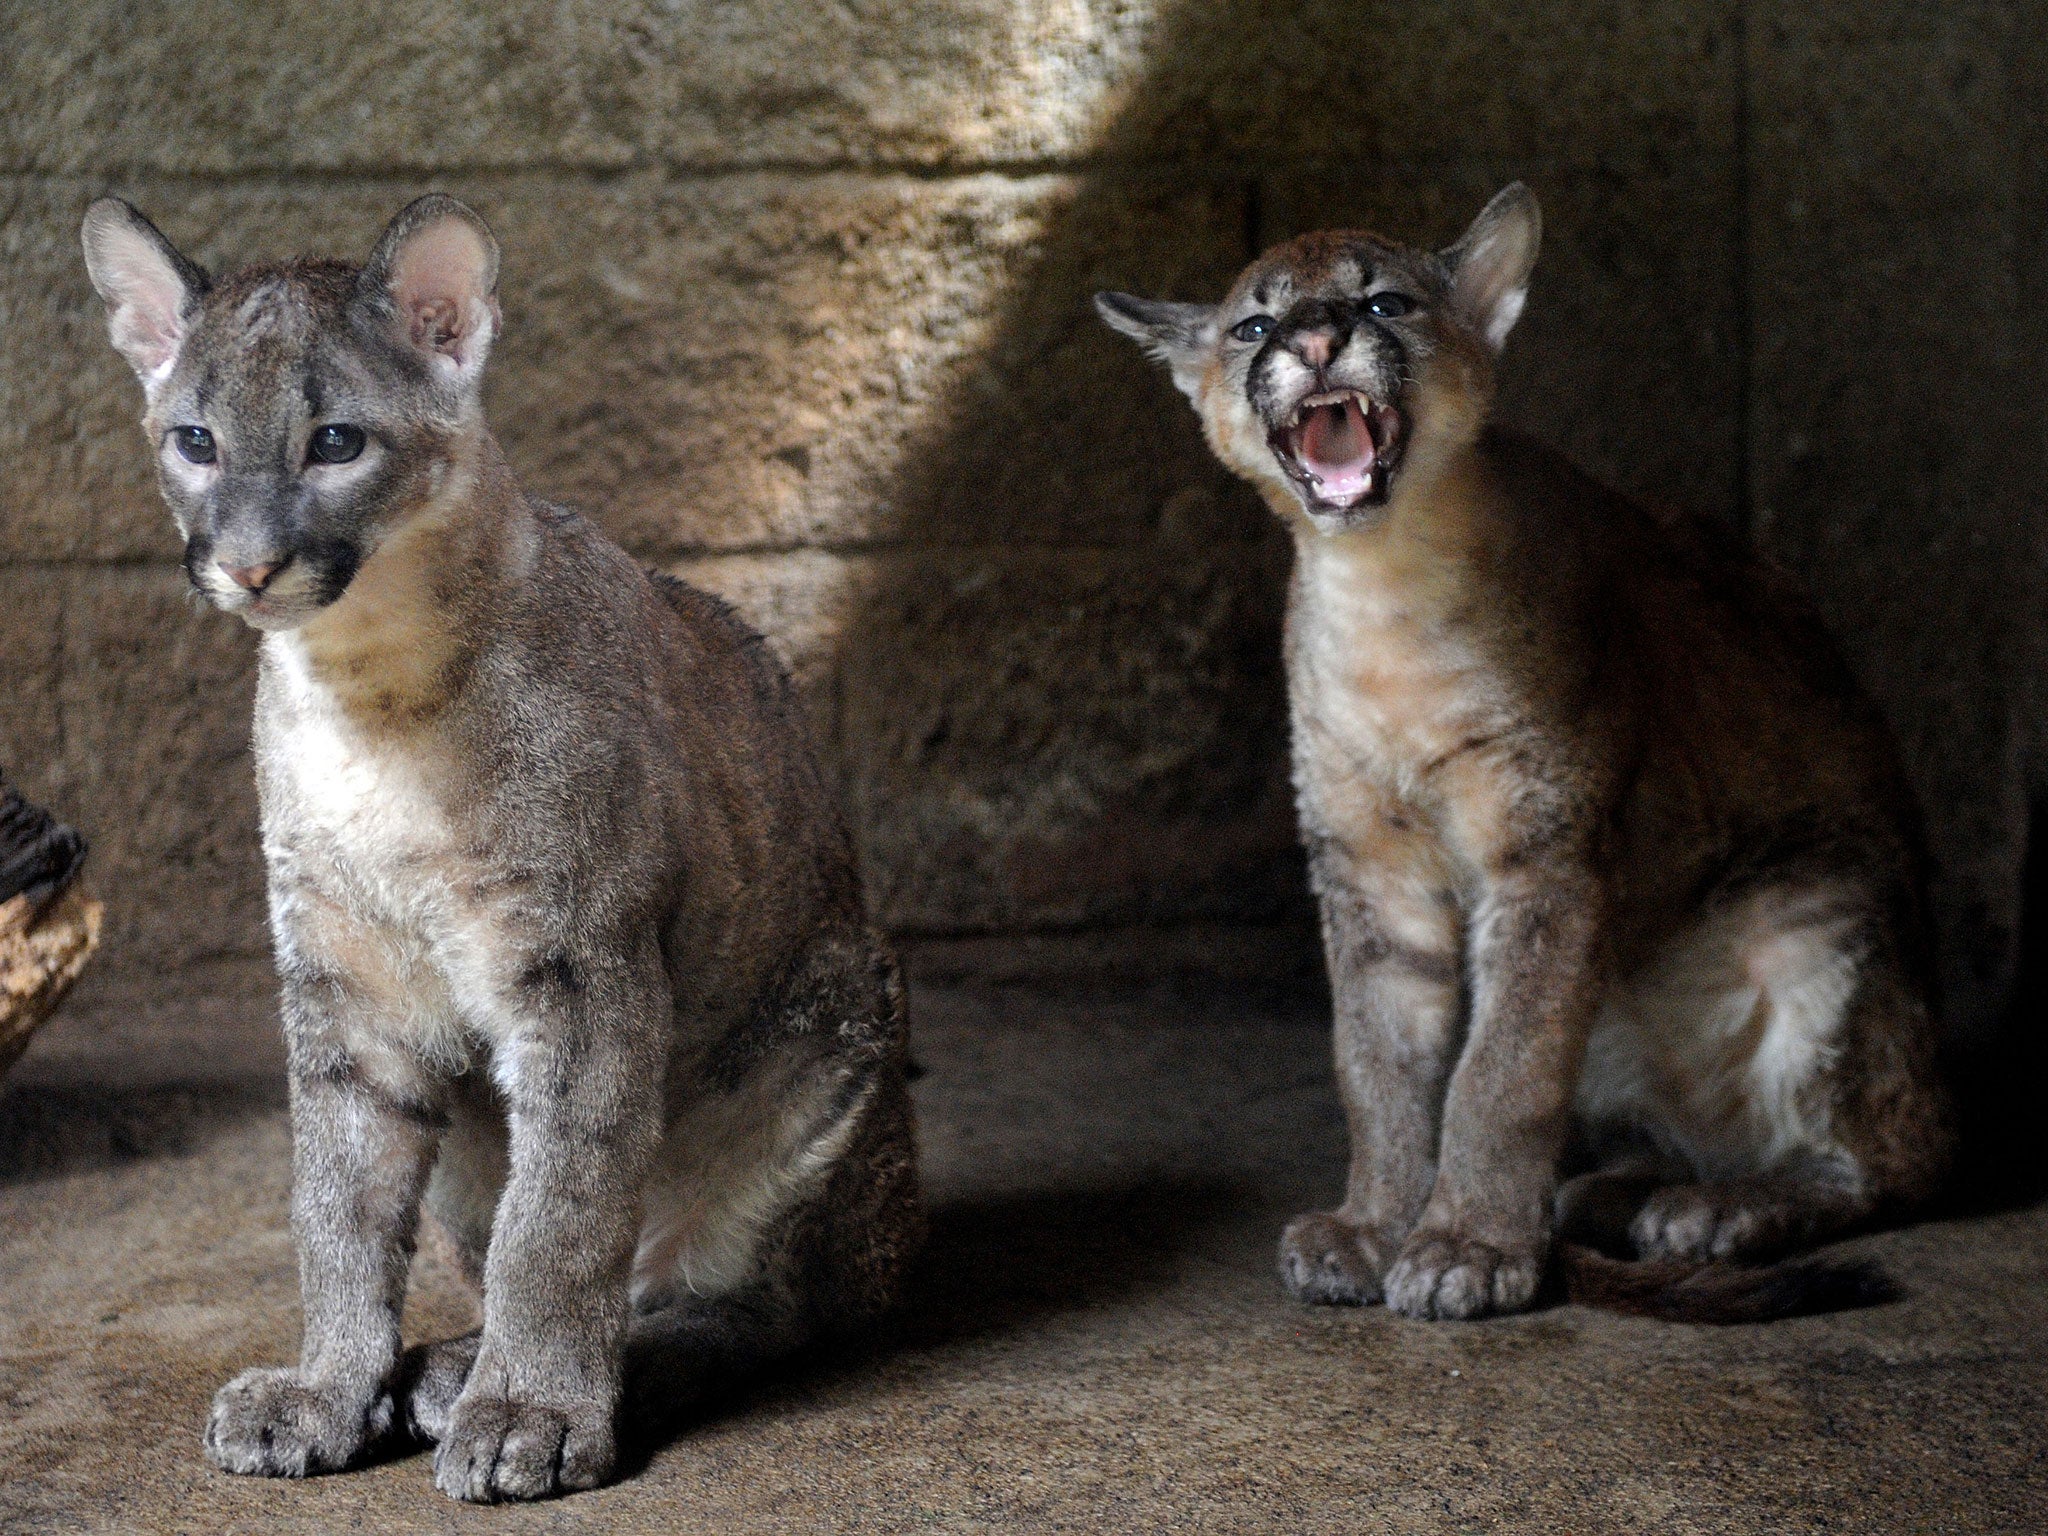 A Russian zoo has named three new puma cubs after Lionel Messi, Luis Suarez and Neymar